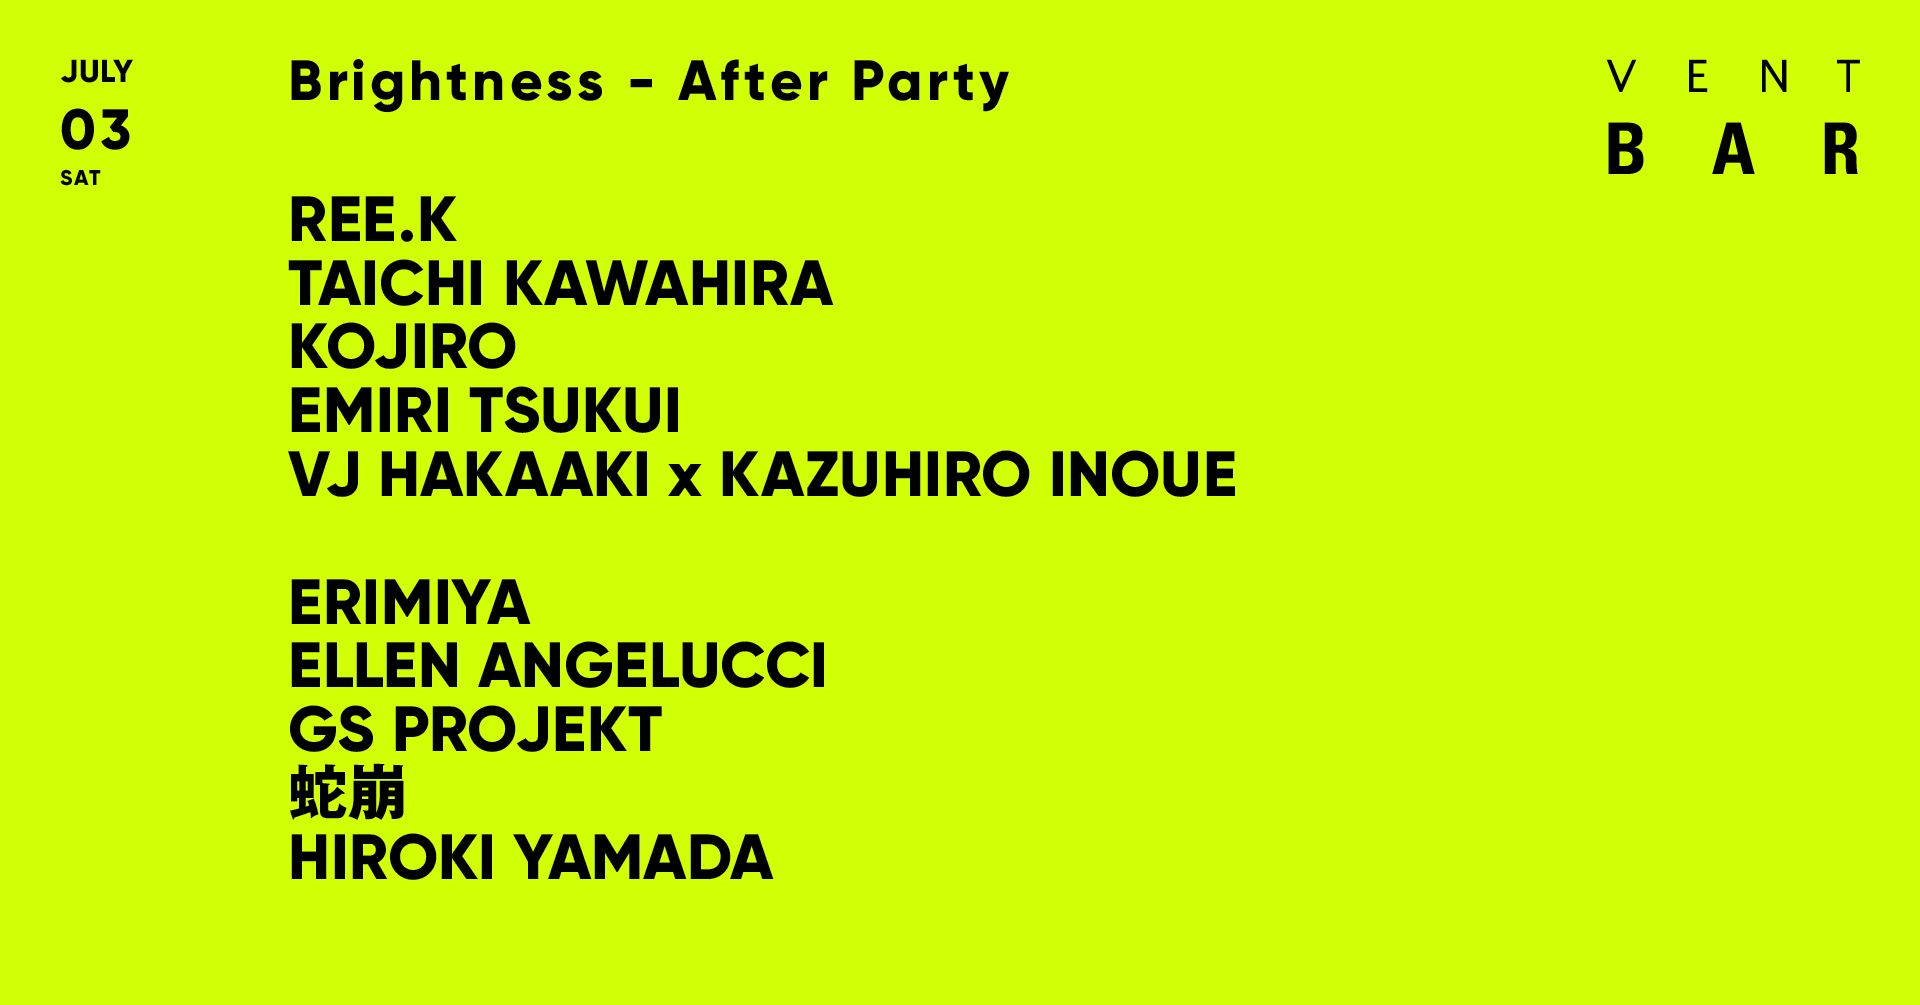 Brightness - After Party / VENT BAR